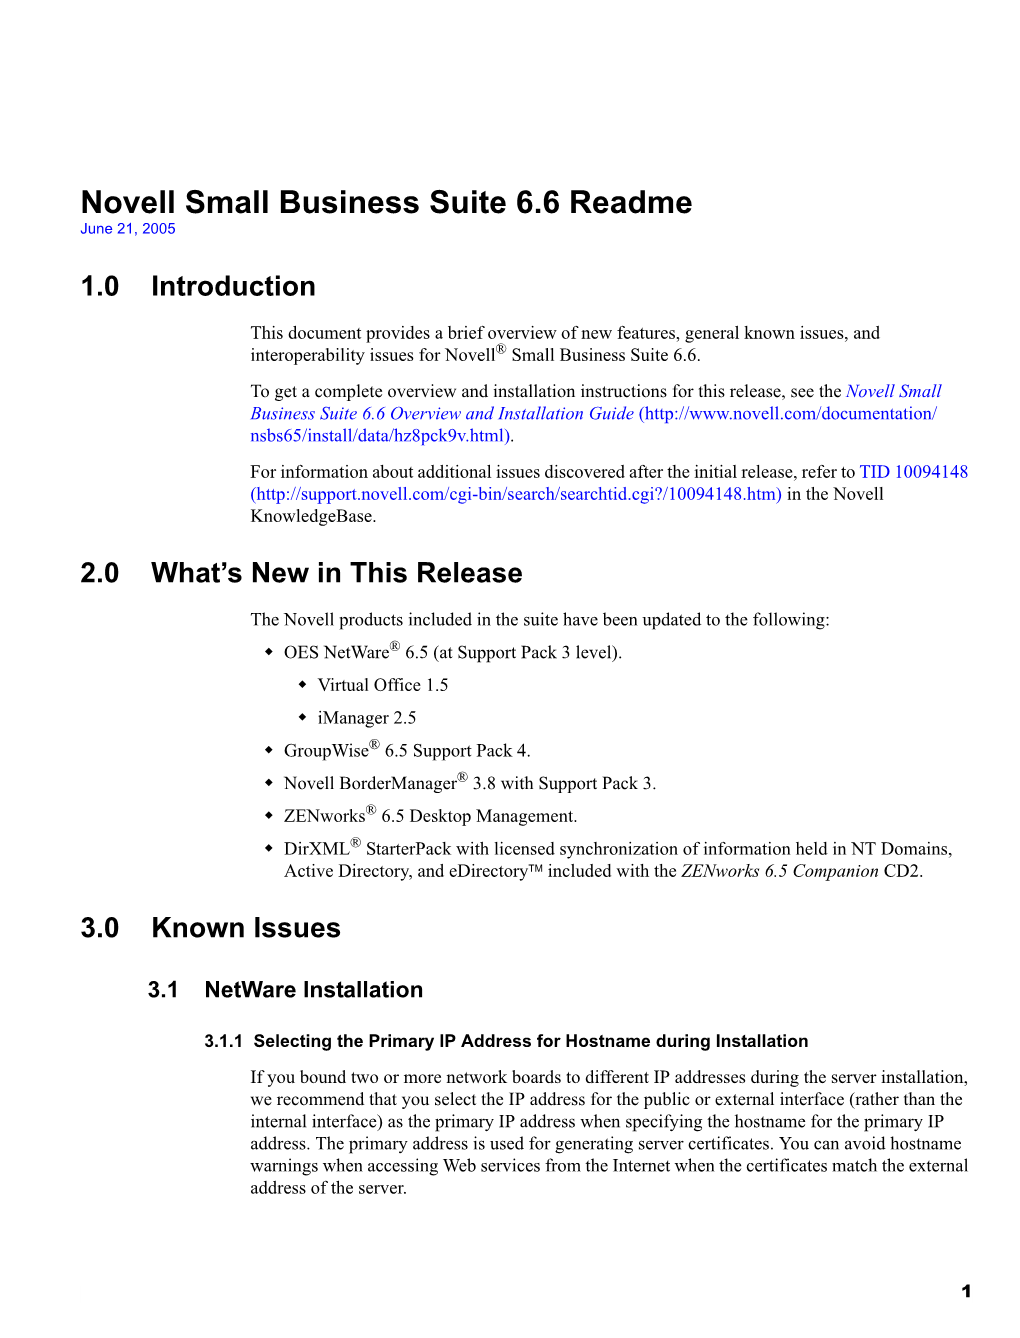 Novell Small Business Suite 6.6 Readme June 21, 2005